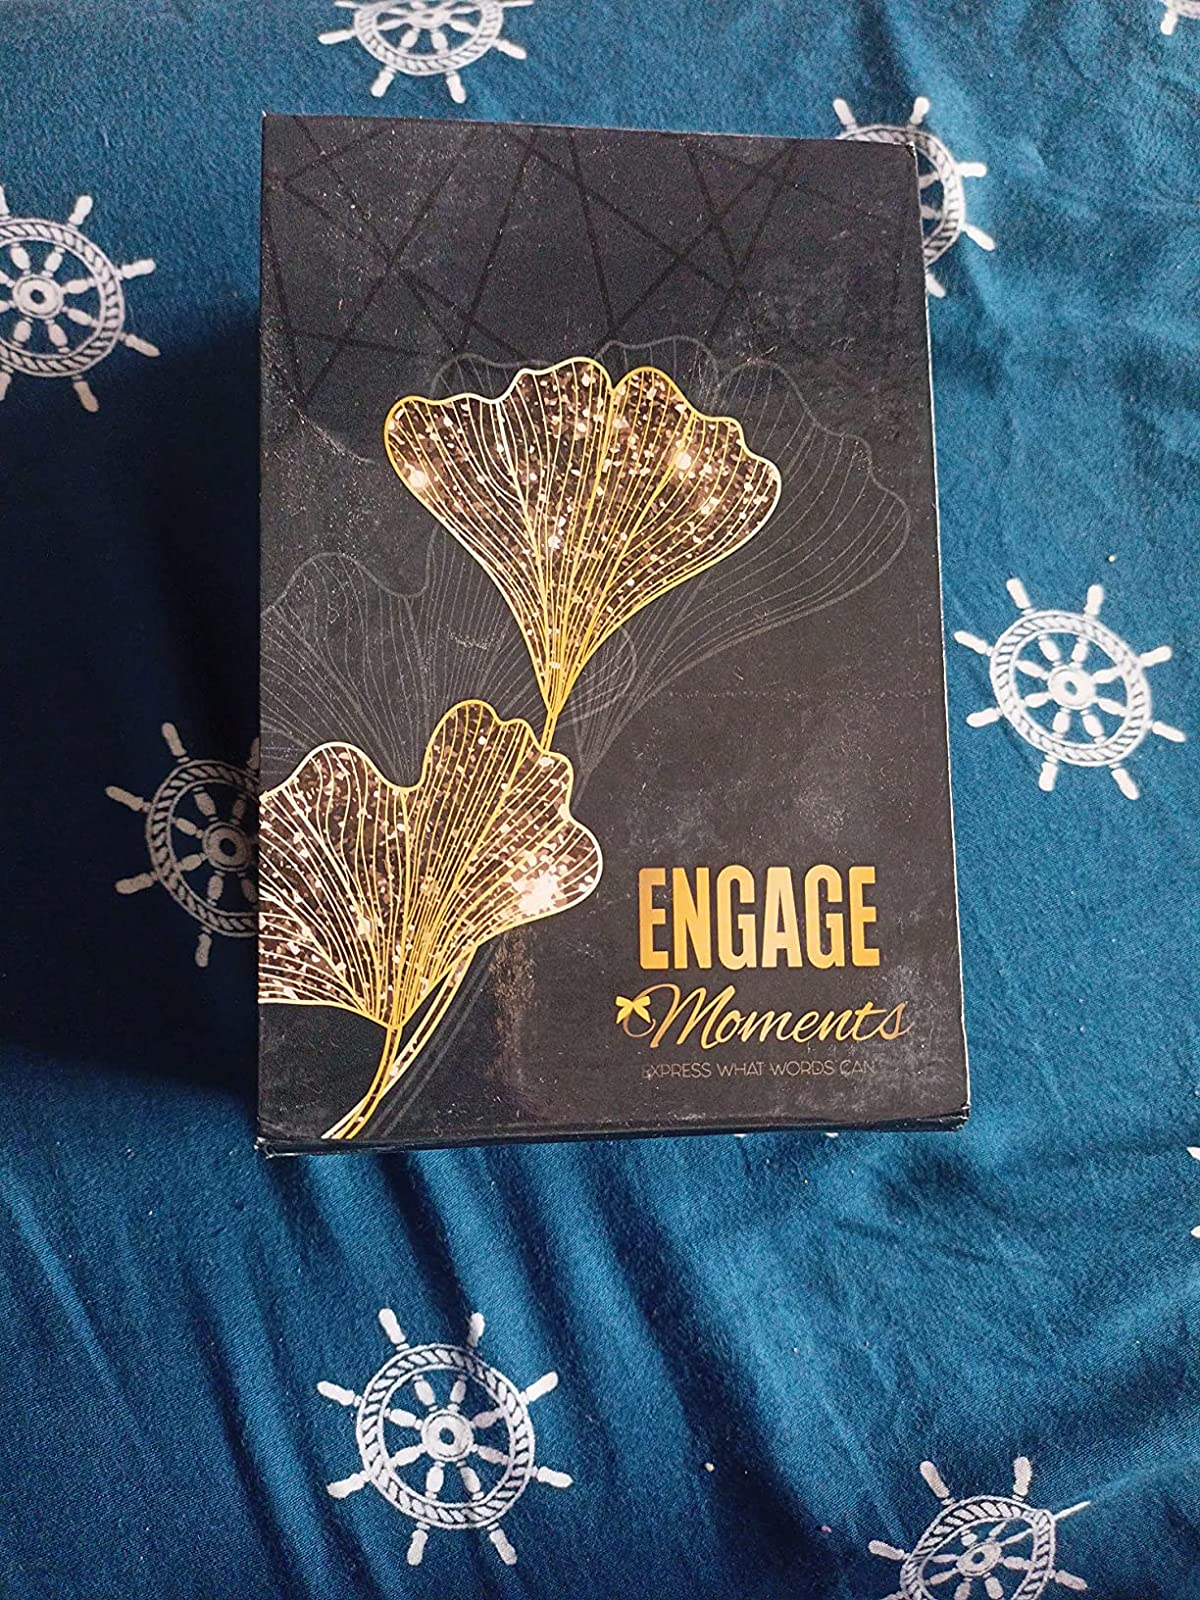 Engage Moments Luxury Perfume Gift Box for Women - L'amante Sunkissed EDT